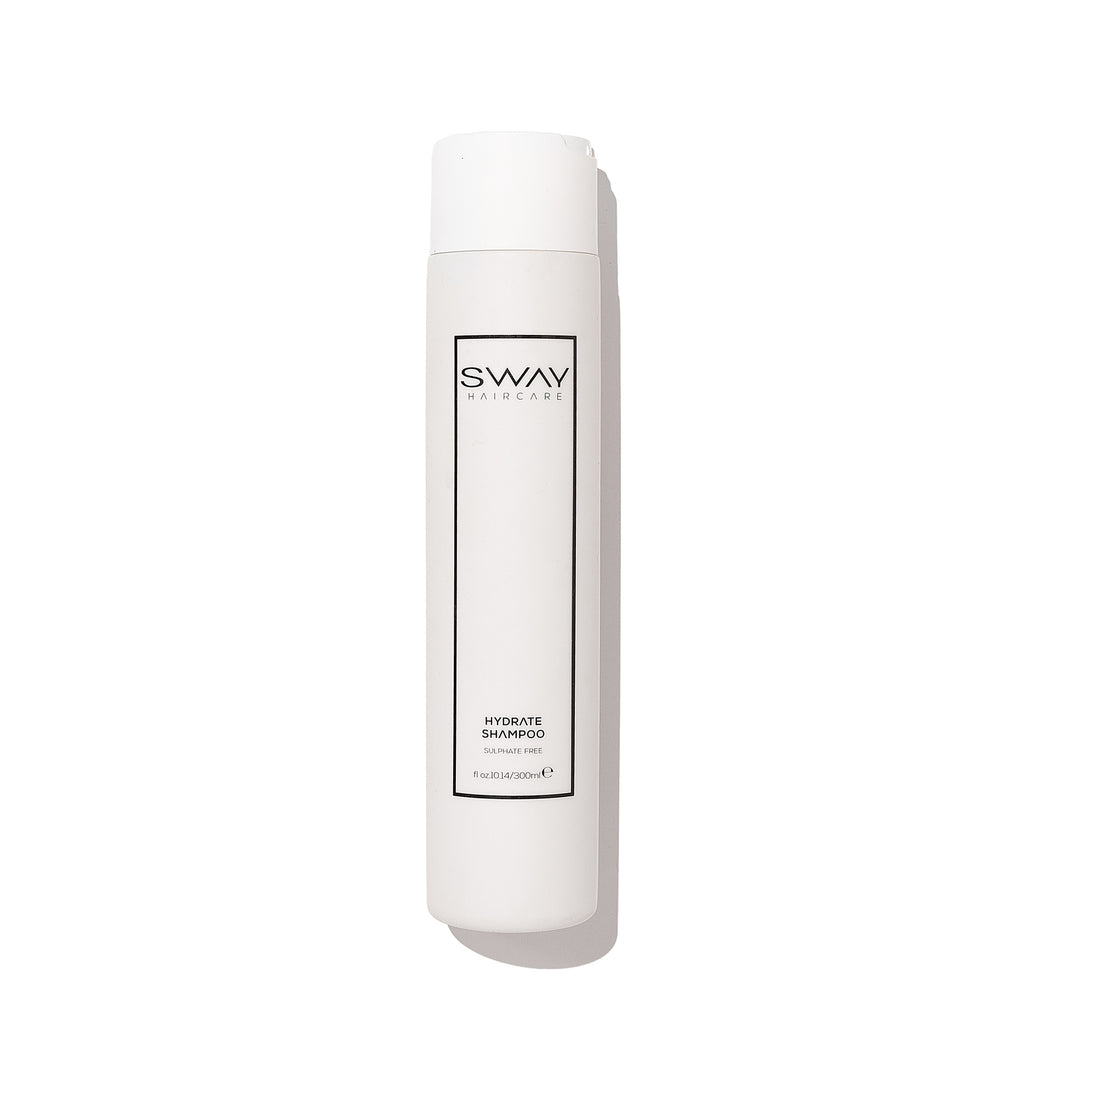 SWAY Hydrate Shampoo - Sulphate and paraben-free formula with argan and macadamia oils for nourished, manageable hair and extensions